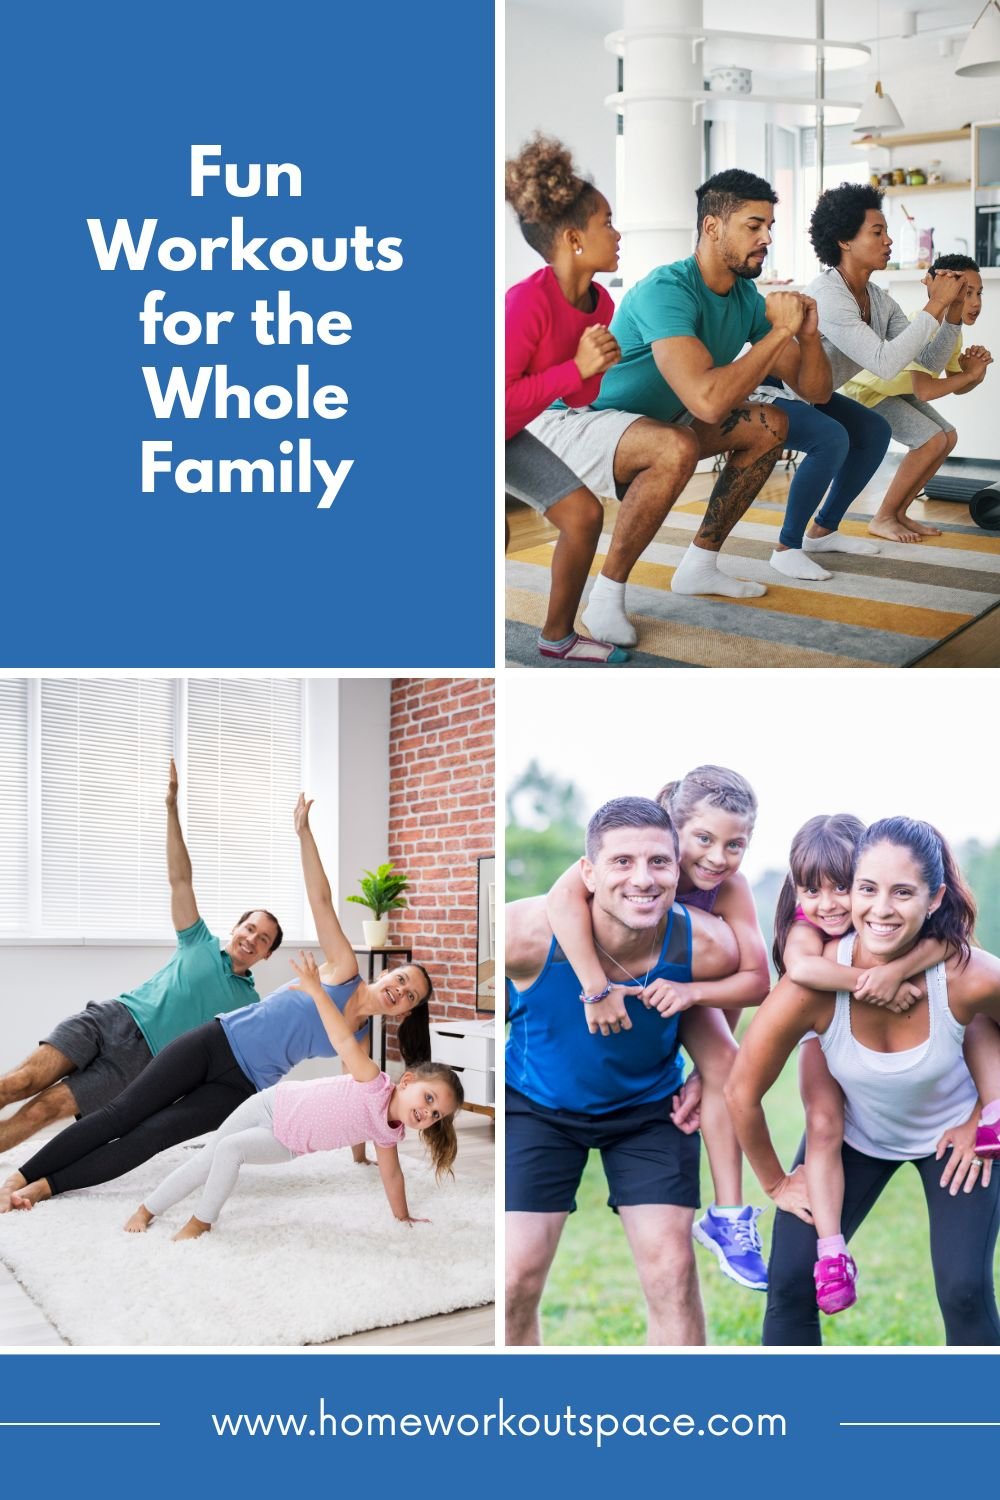 Fun Workouts for the Whole Family